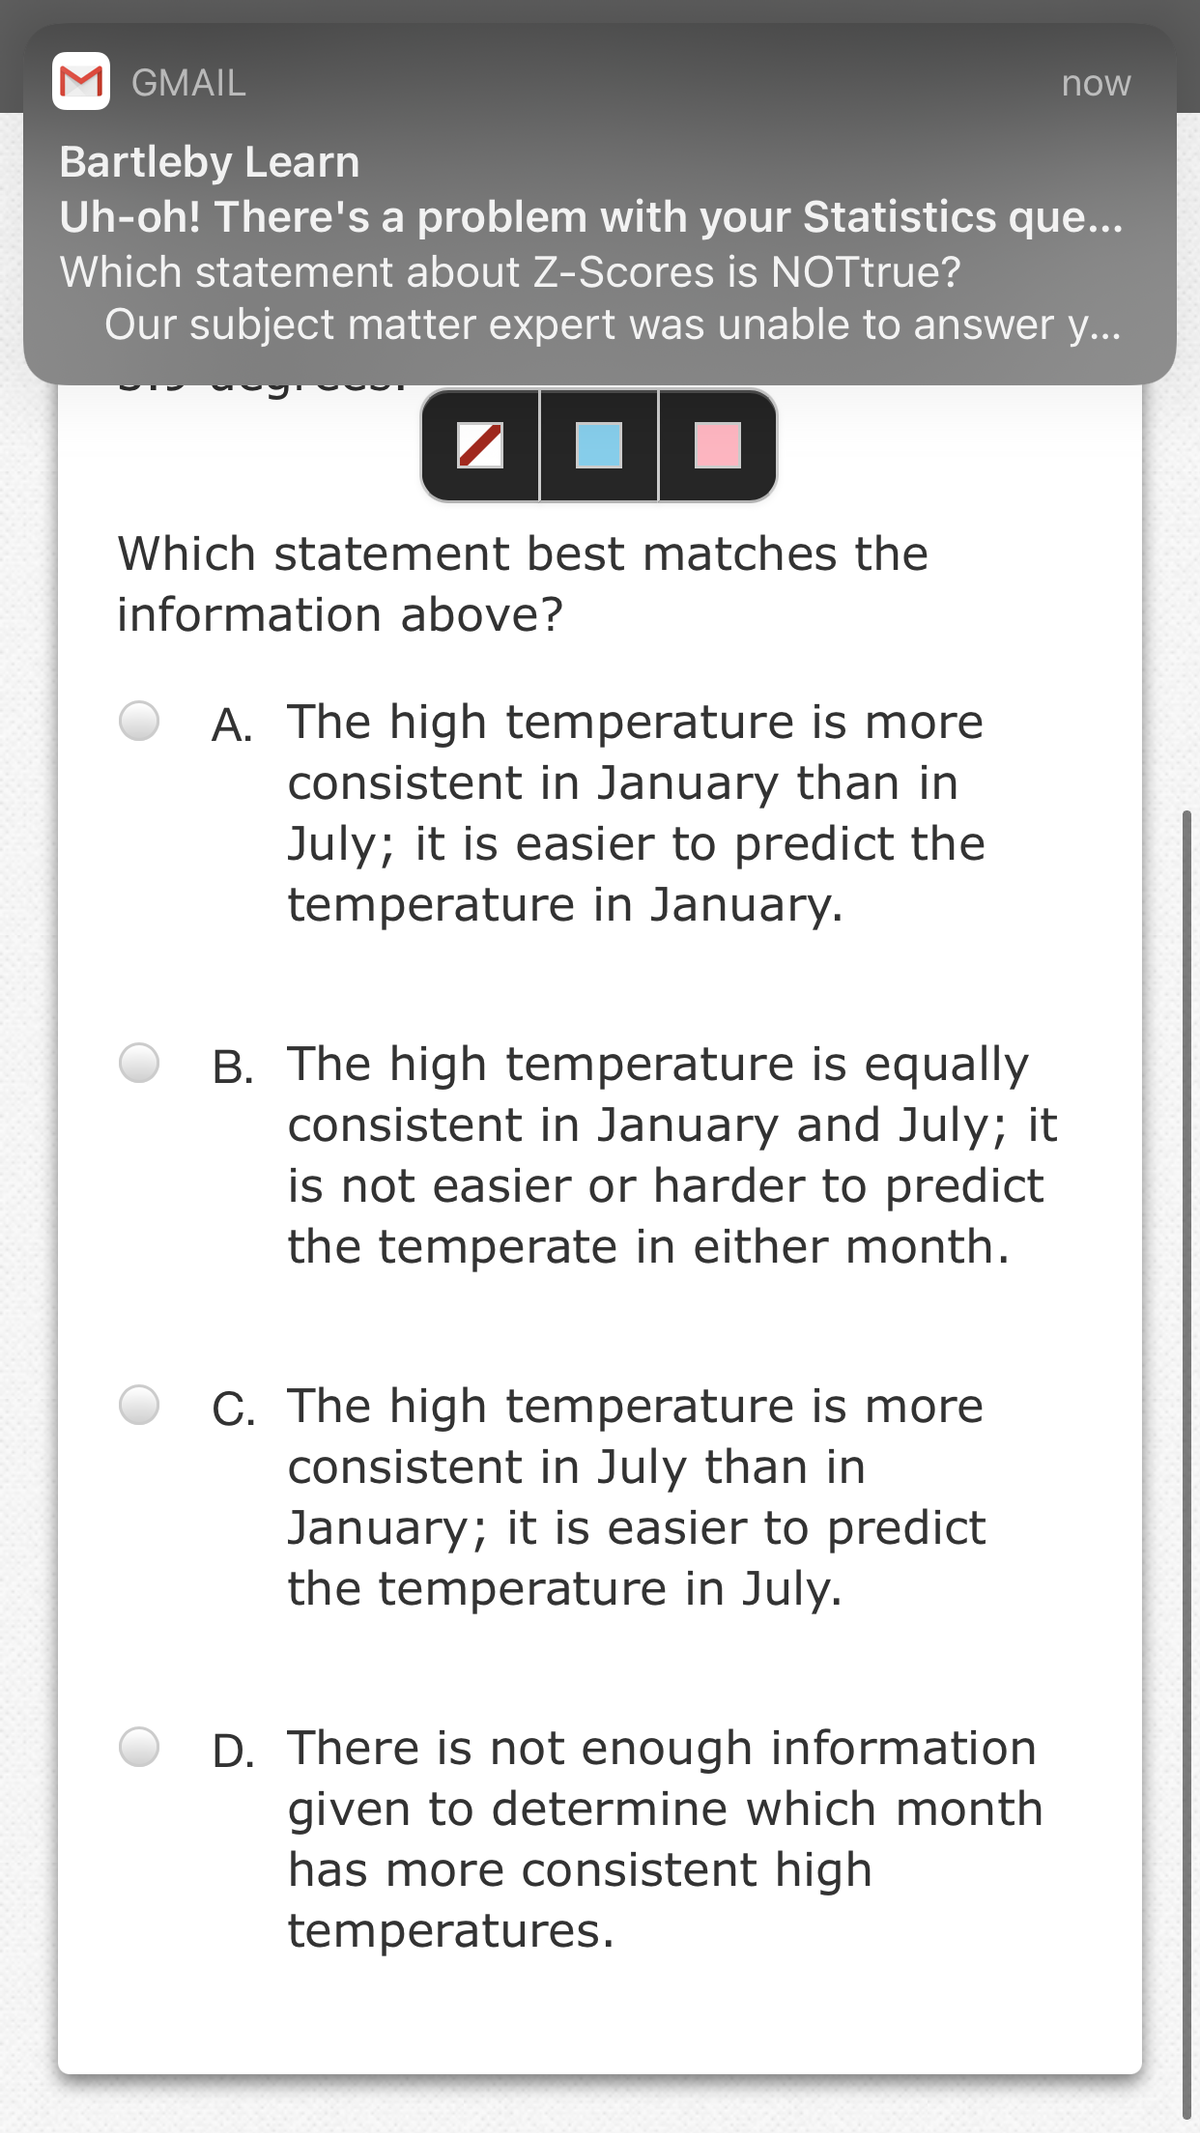 M GMAIL
now
Bartleby Learn
Uh-oh! There's a problem with your Statistics que...
Which statement about Z-Scores is NOTtrue?
Our subject matter expert was unable to answer y...
OD
Which statement best matches the
information above?
A. The high temperature is more
consistent in January than in
July; it is easier to predict the
temperature in January.
B. The high temperature is equally
consistent in January and July; it
is not easier or harder to predict
the temperate in either month.
C. The high temperature is more
consistent in July than in
January; it is easier to predict
the temperature in July.
D. There is not enough information
given to determine which month
has more consistent high
temperatures.
